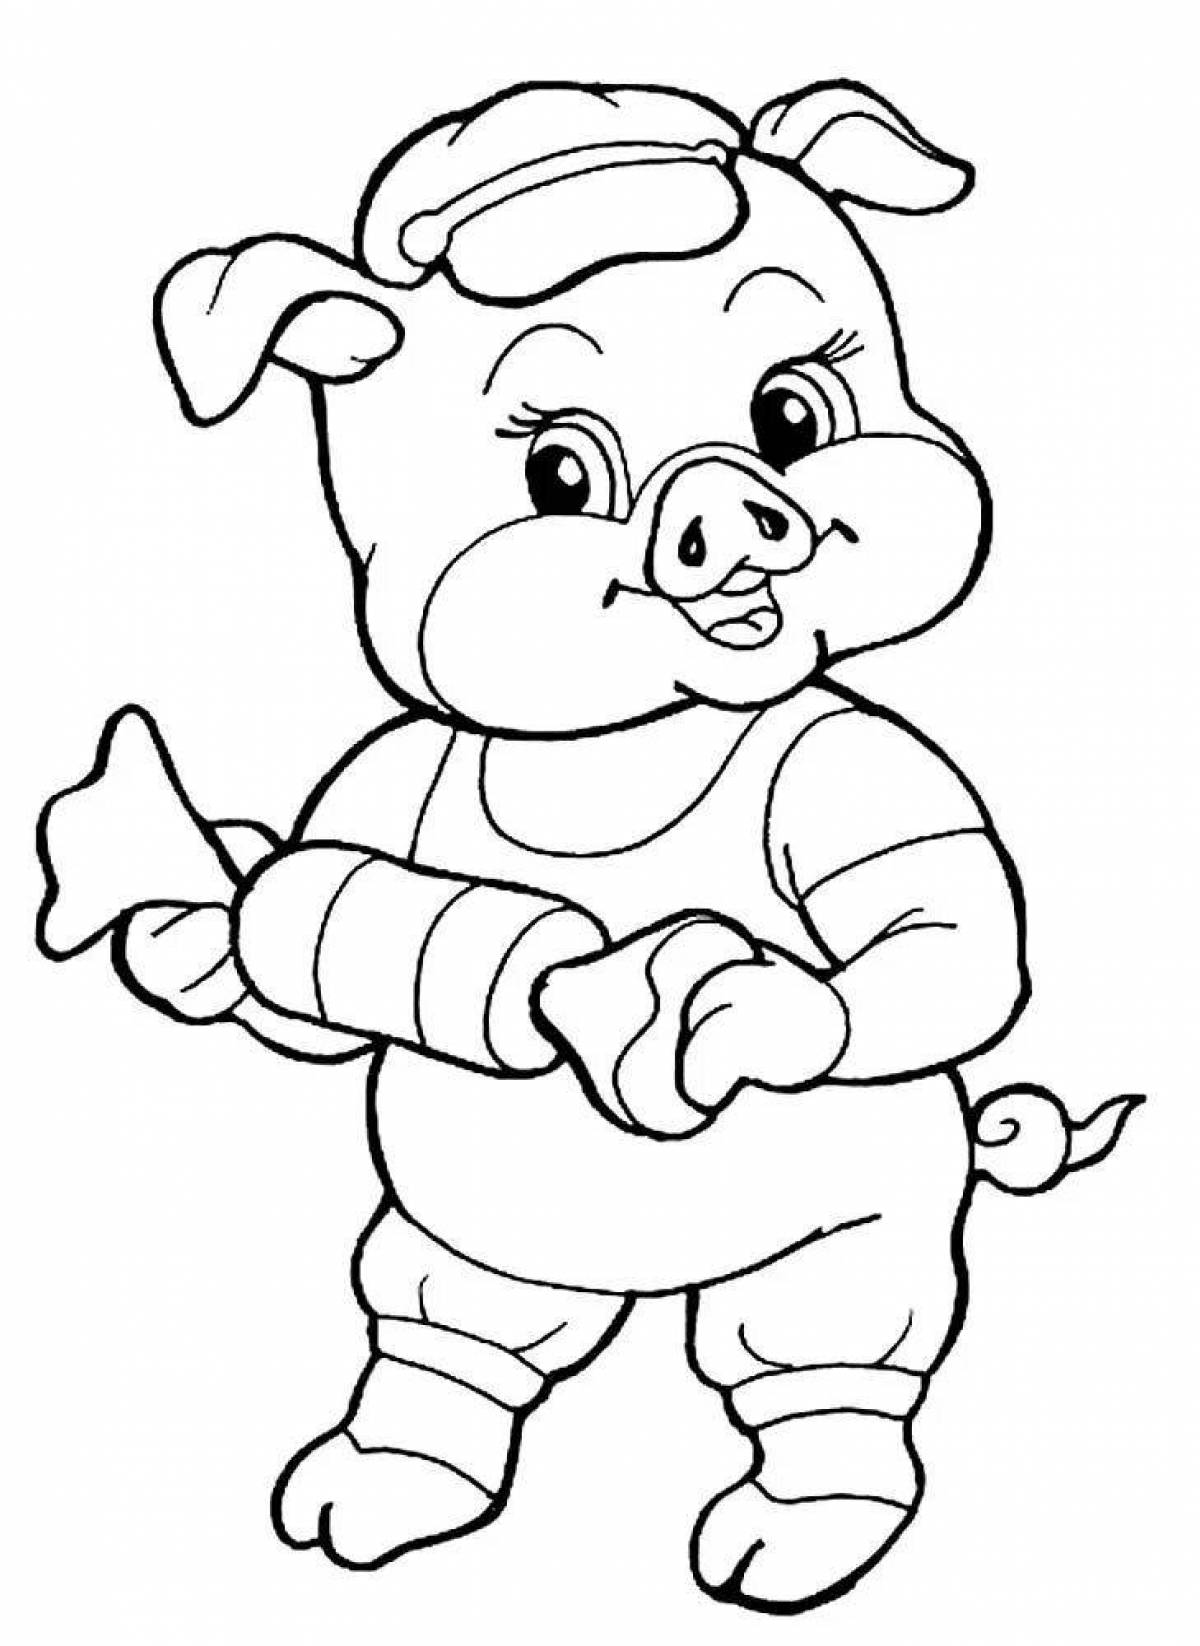 Live coloring pig